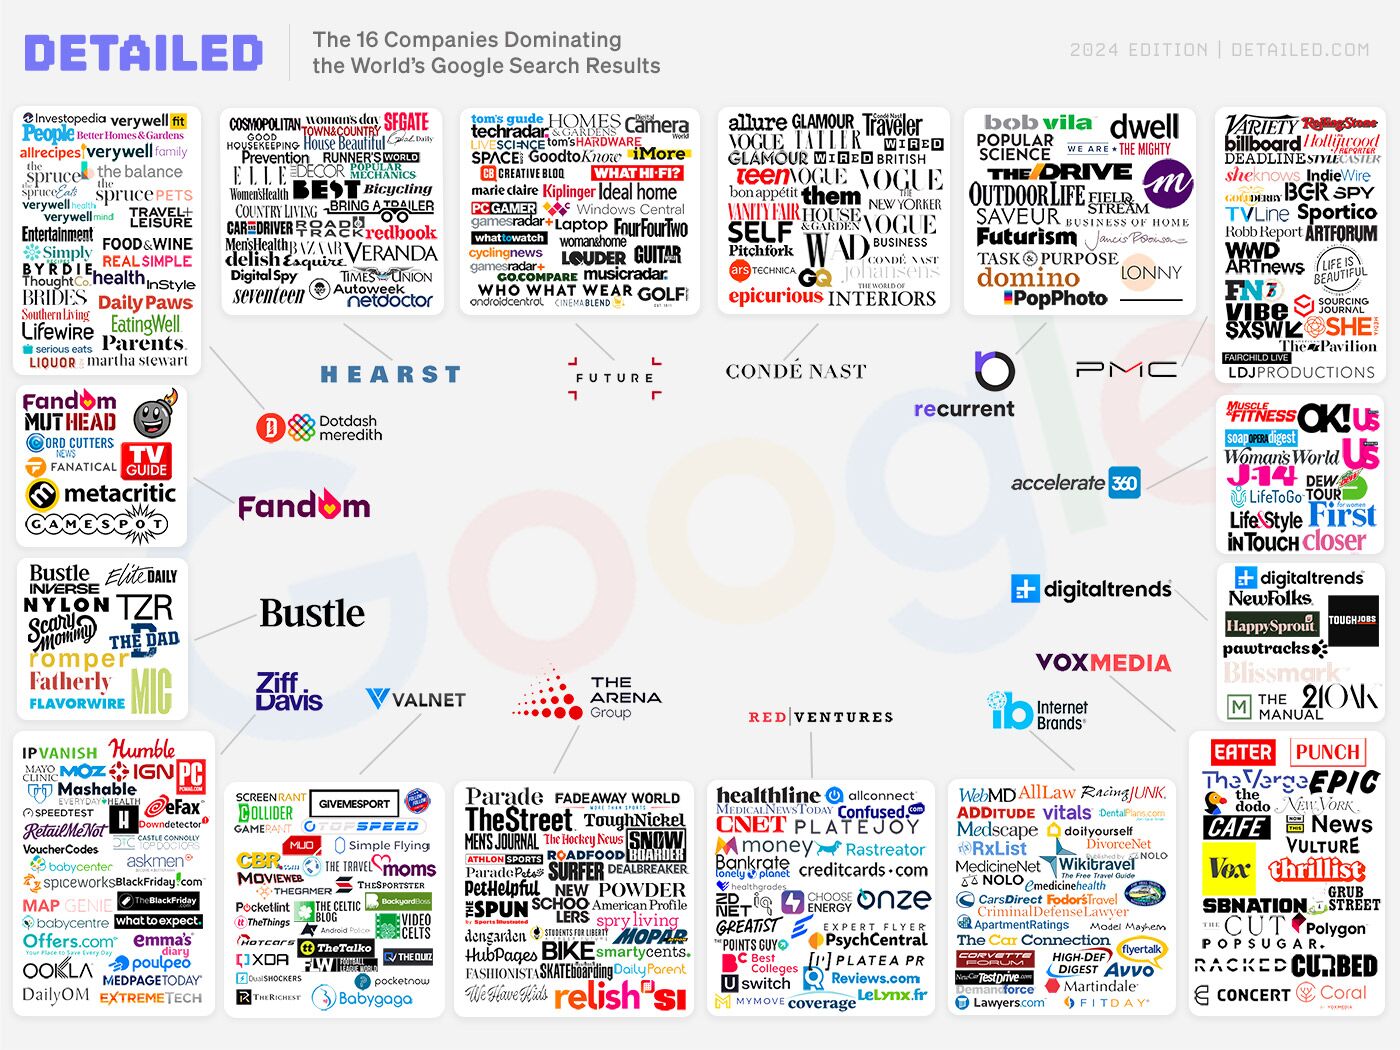 the-16-companies-getting-3-5-billion-monthly-click